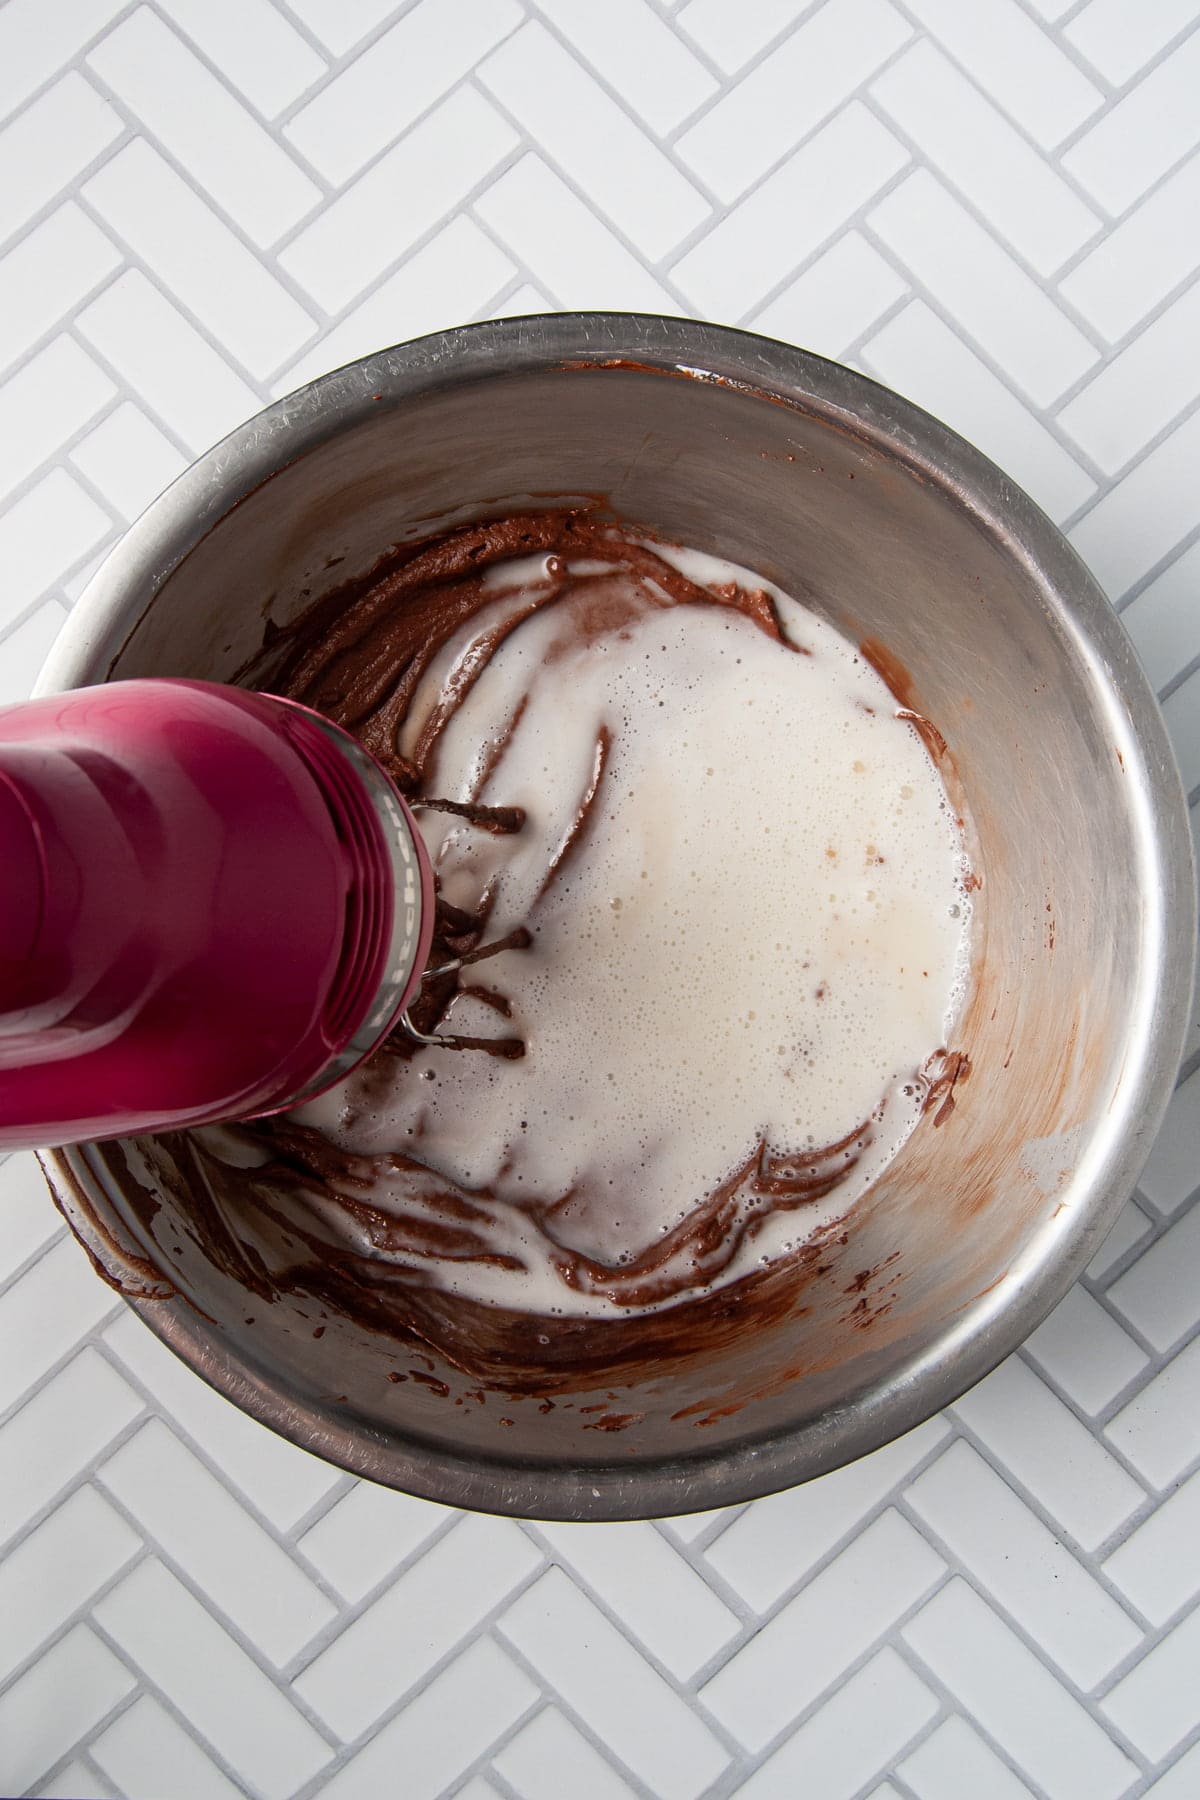 adding egg white and sugar mixture to chocolate mousse